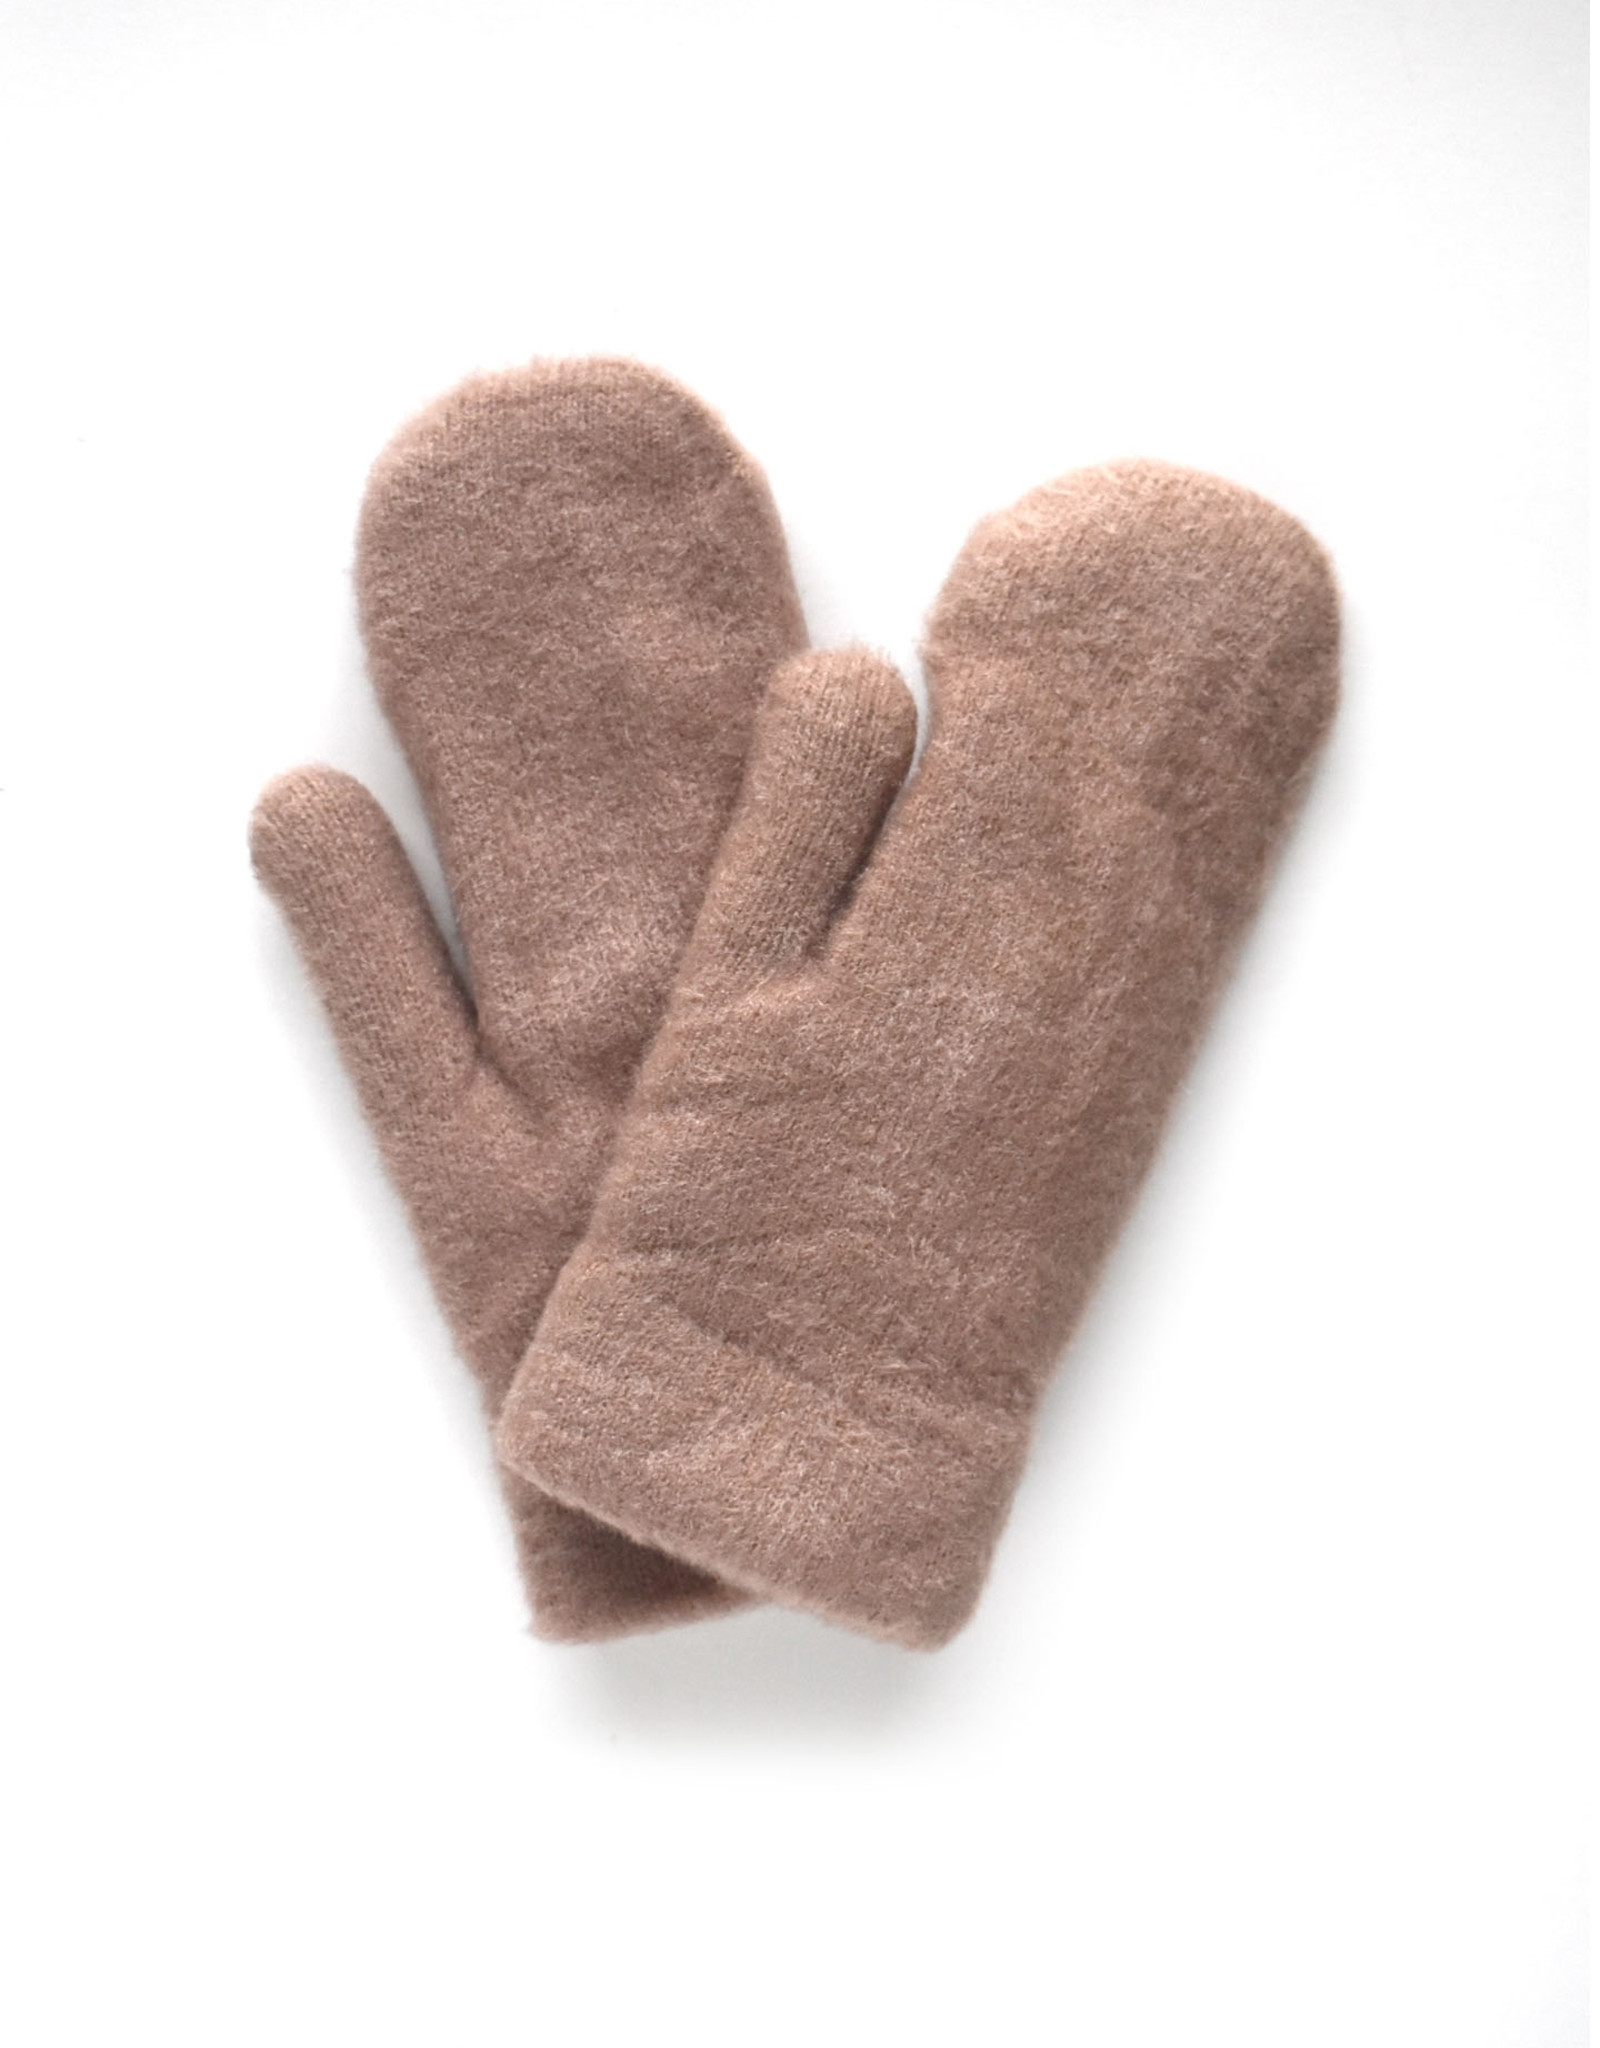 Faux Fur Lined Fuzzy Mittens - Camel